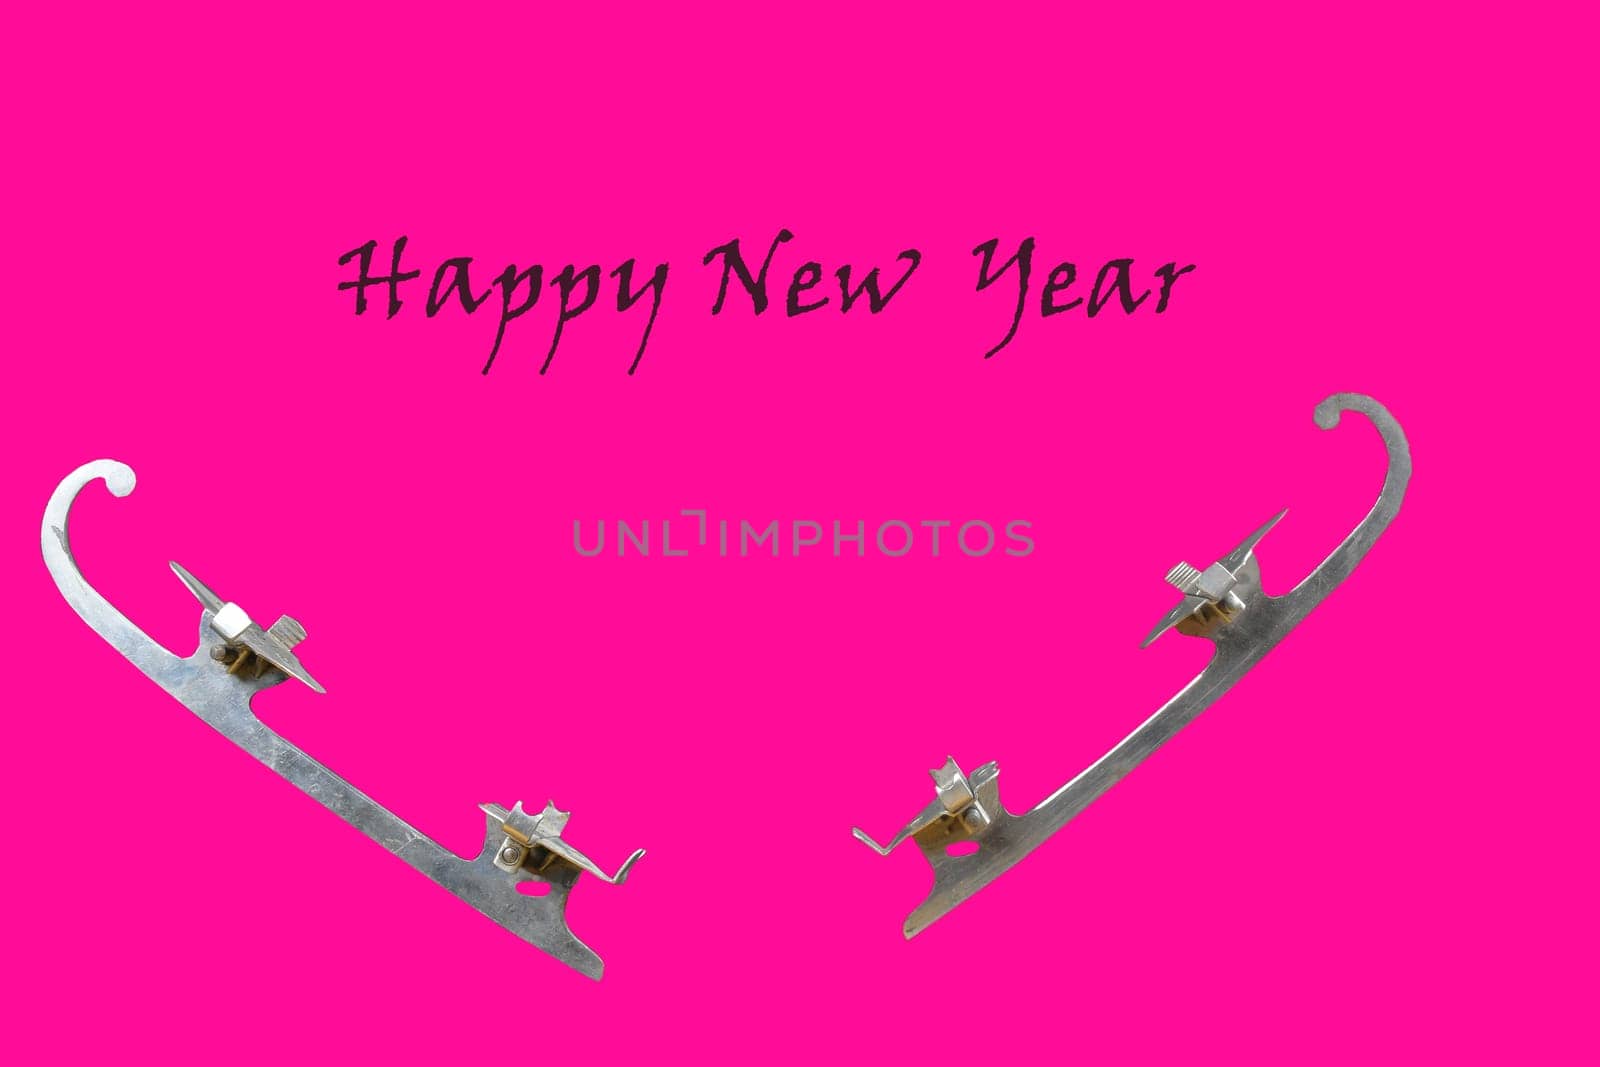 Vintage ice-skate on pink background. Text - Happy New Year. Copy space.